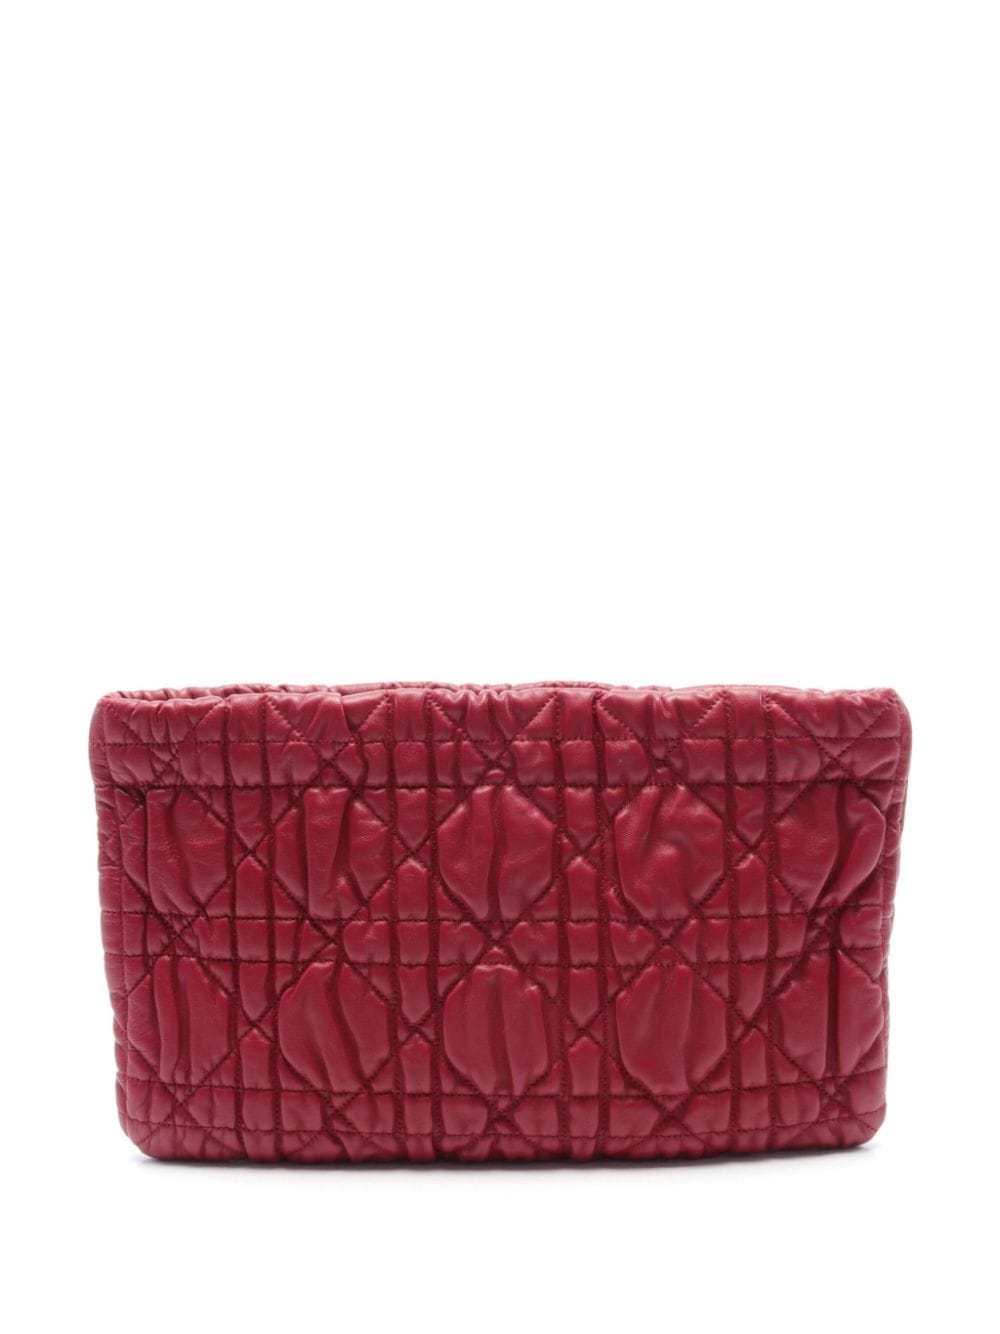 Christian Dior Pre-Owned 2010 Cannage leather clutch bag - Red